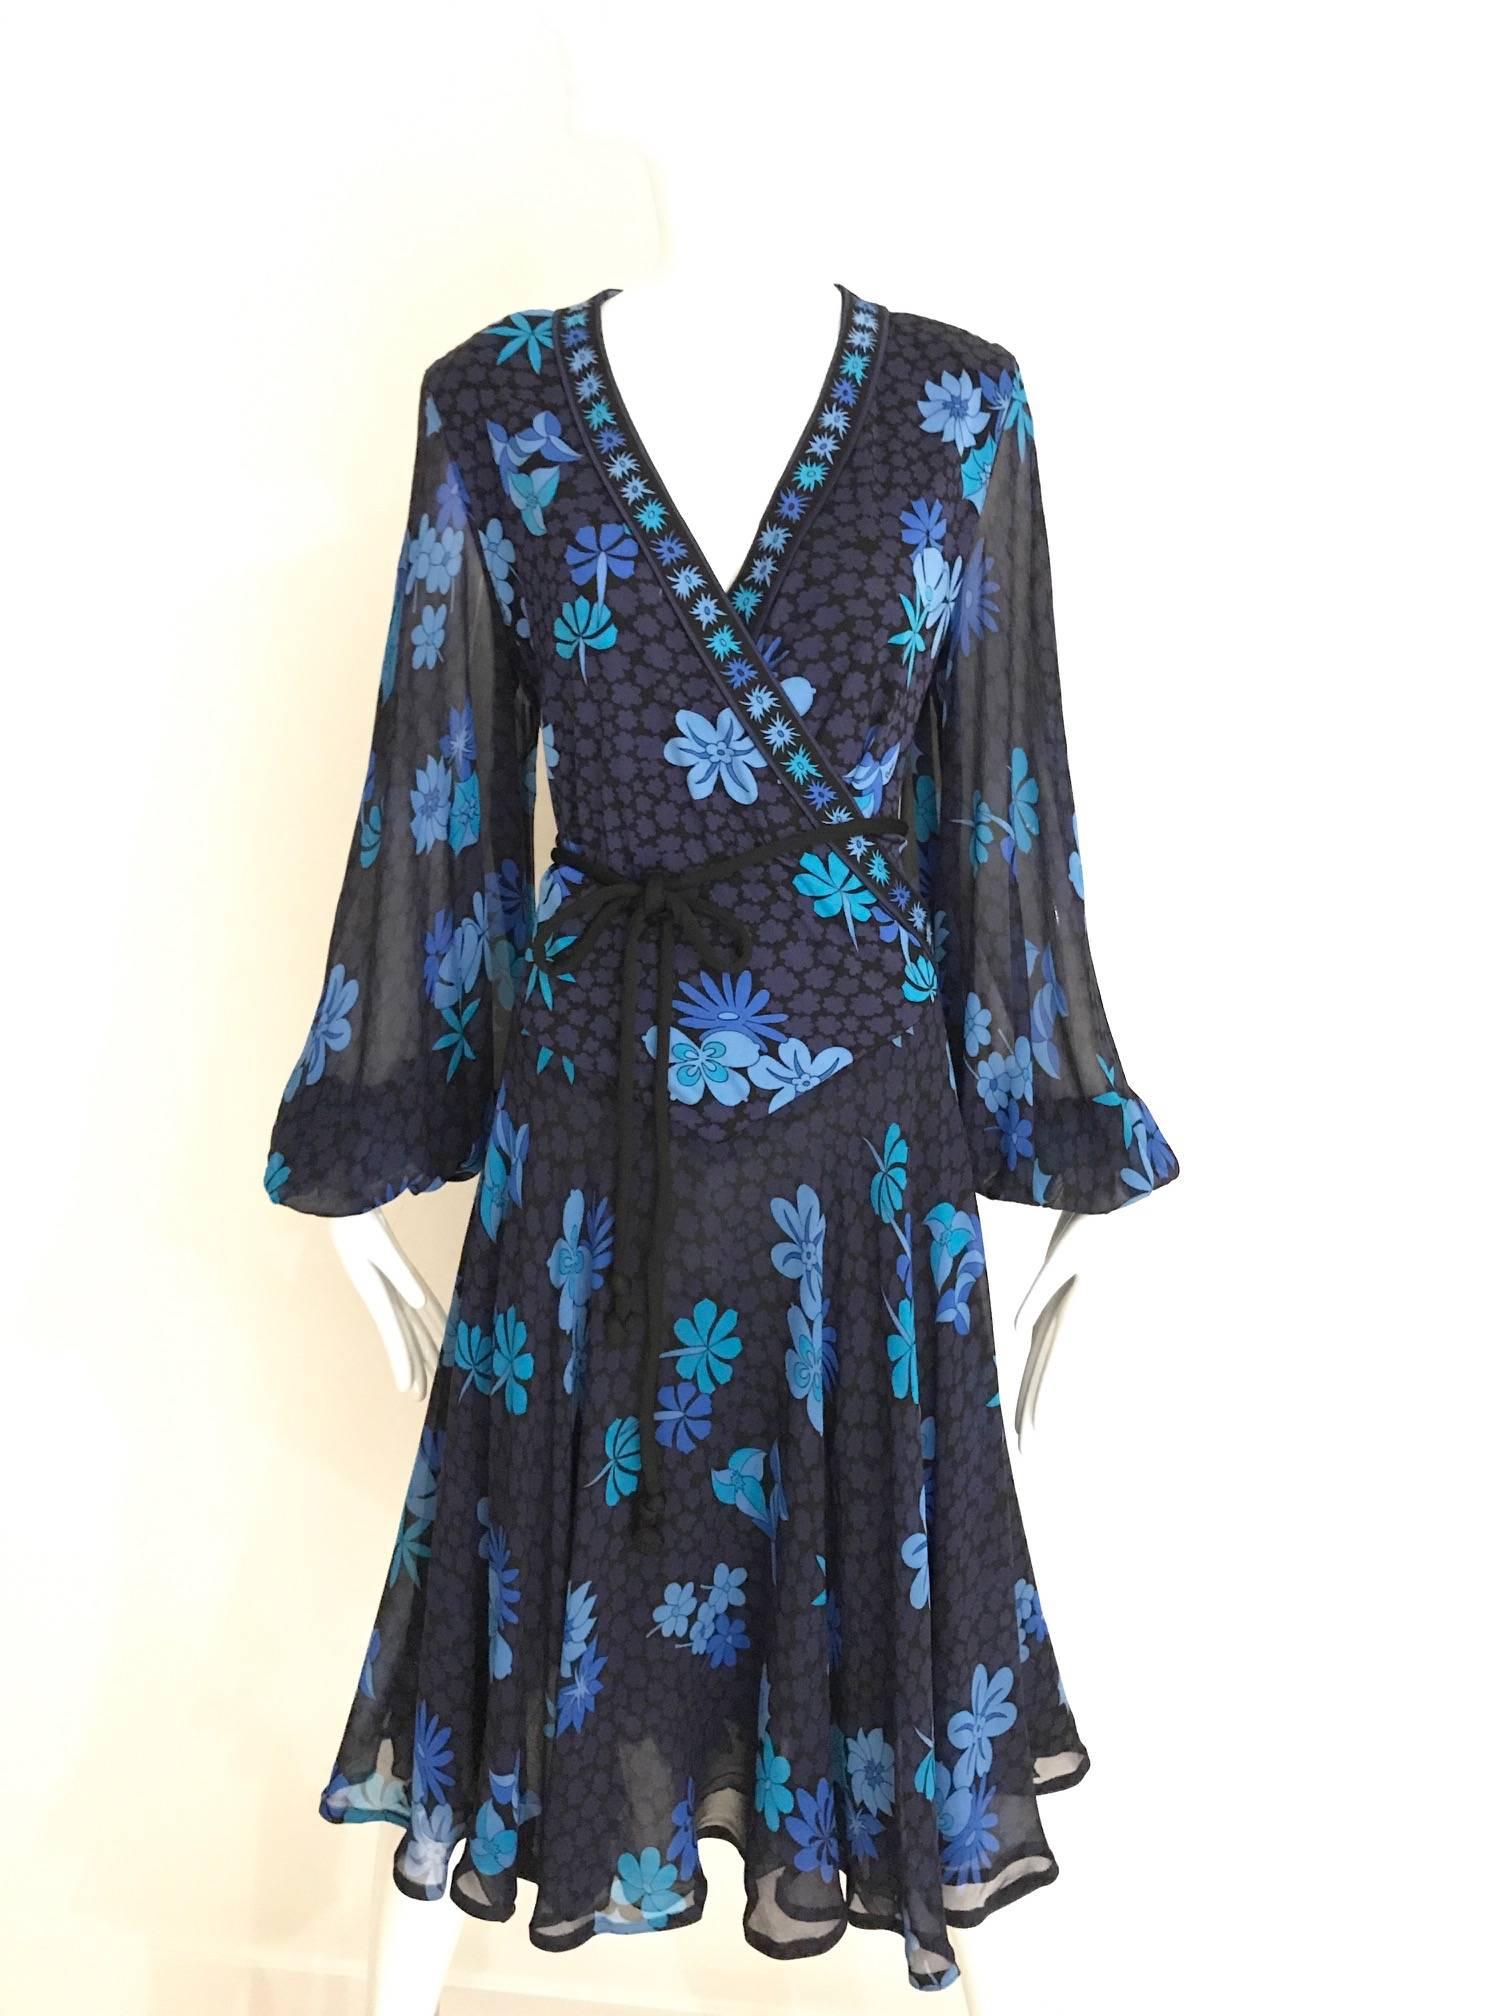 Vintage 1970s Bessi black light jersey dress in light blue florla print V neck dress with billowy sleeves. Dress is lined in silk and comes with black jersey cord belt.

Bust : 44” / waist 40” / dress length 44” 
Size X Large